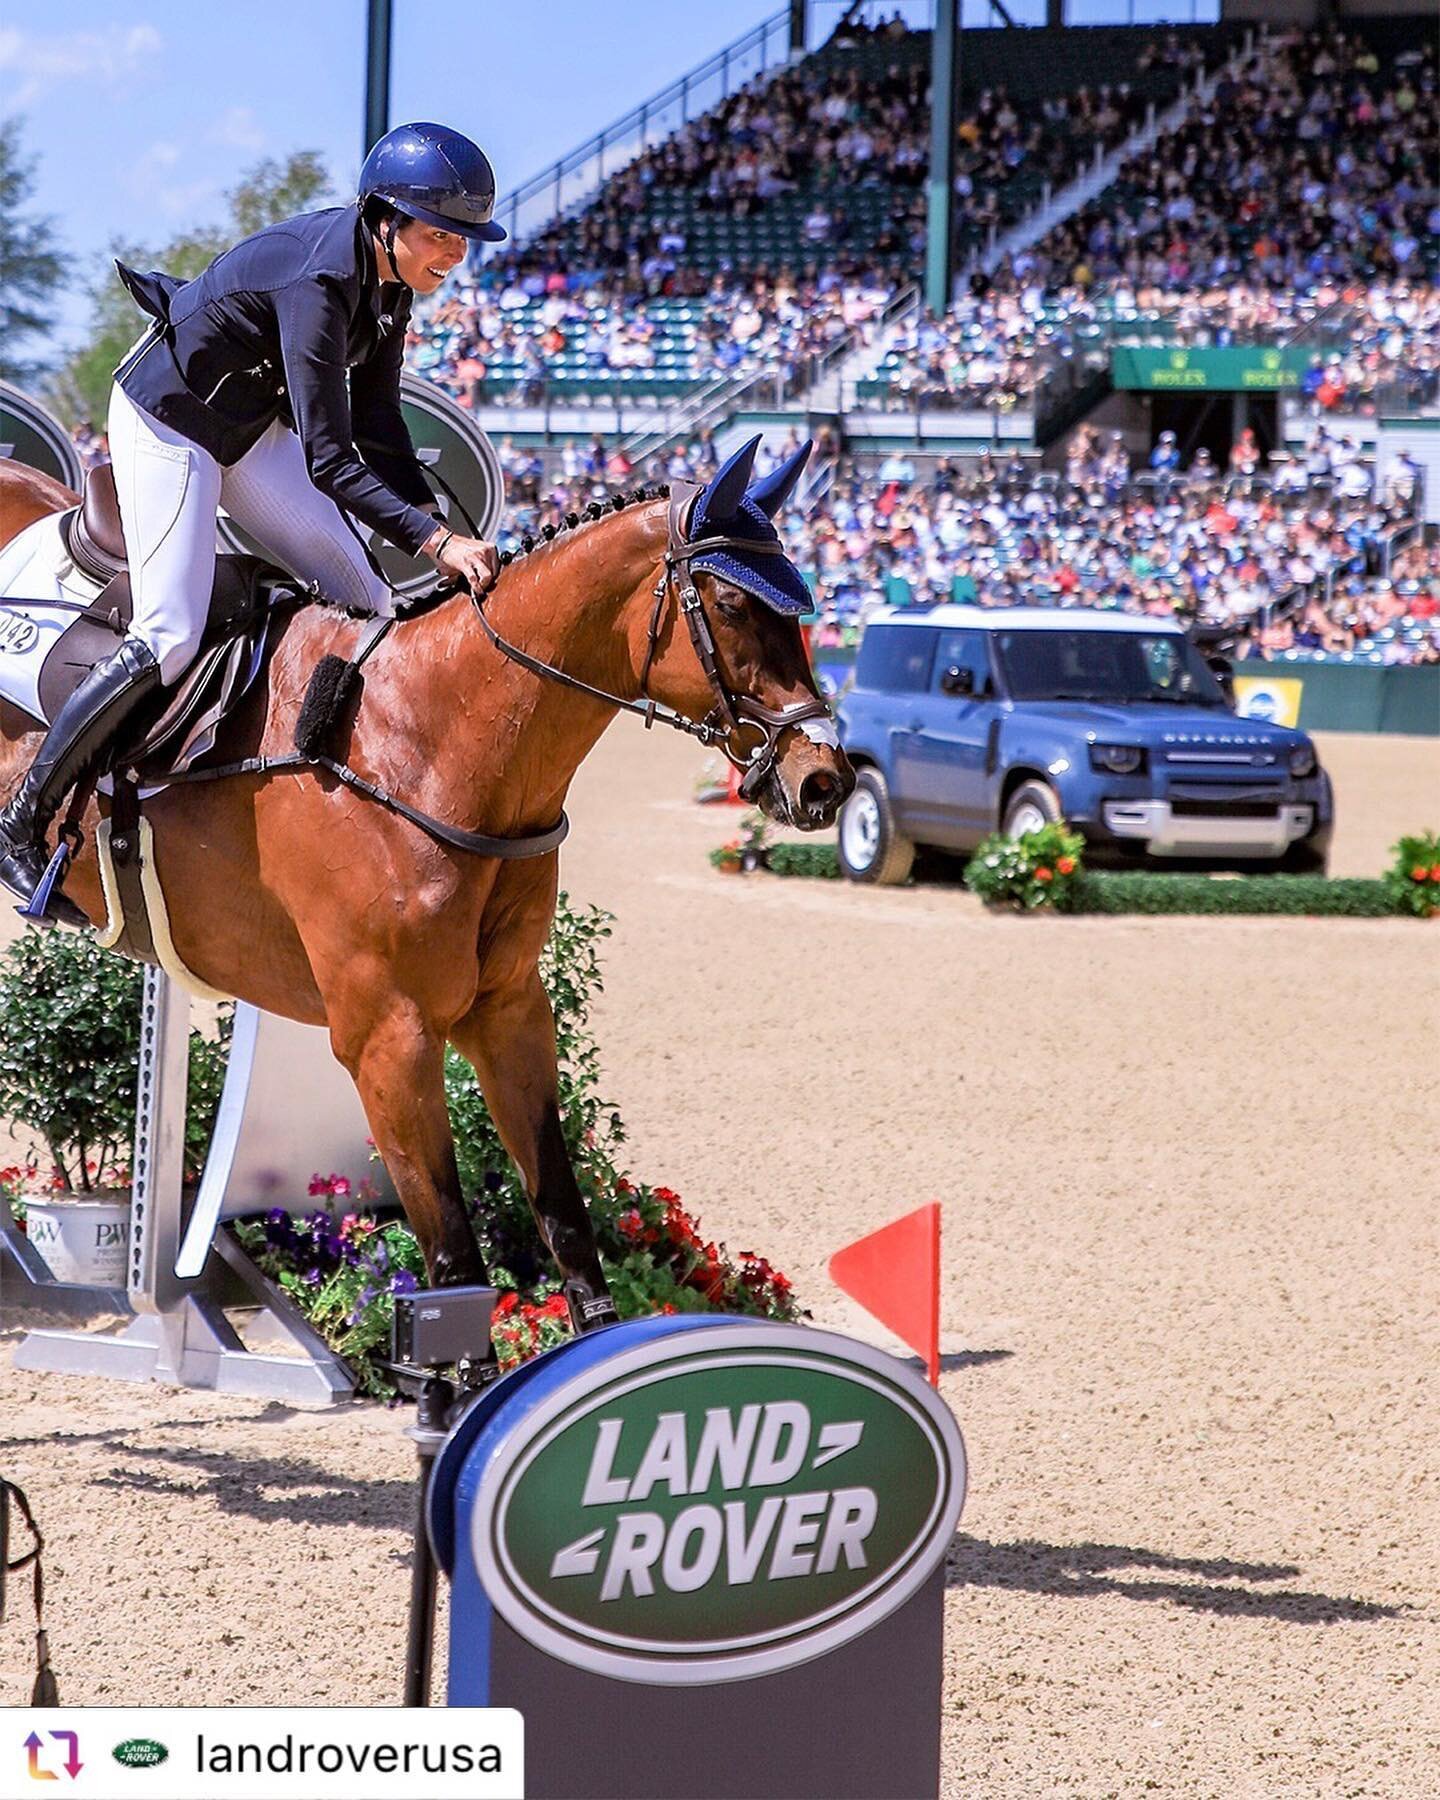 Happy to support the Land Rover Kentucky 3 Day Event!
#horses #eventinghorse #kentucky #landrover #landroverusa #sport #showjumping